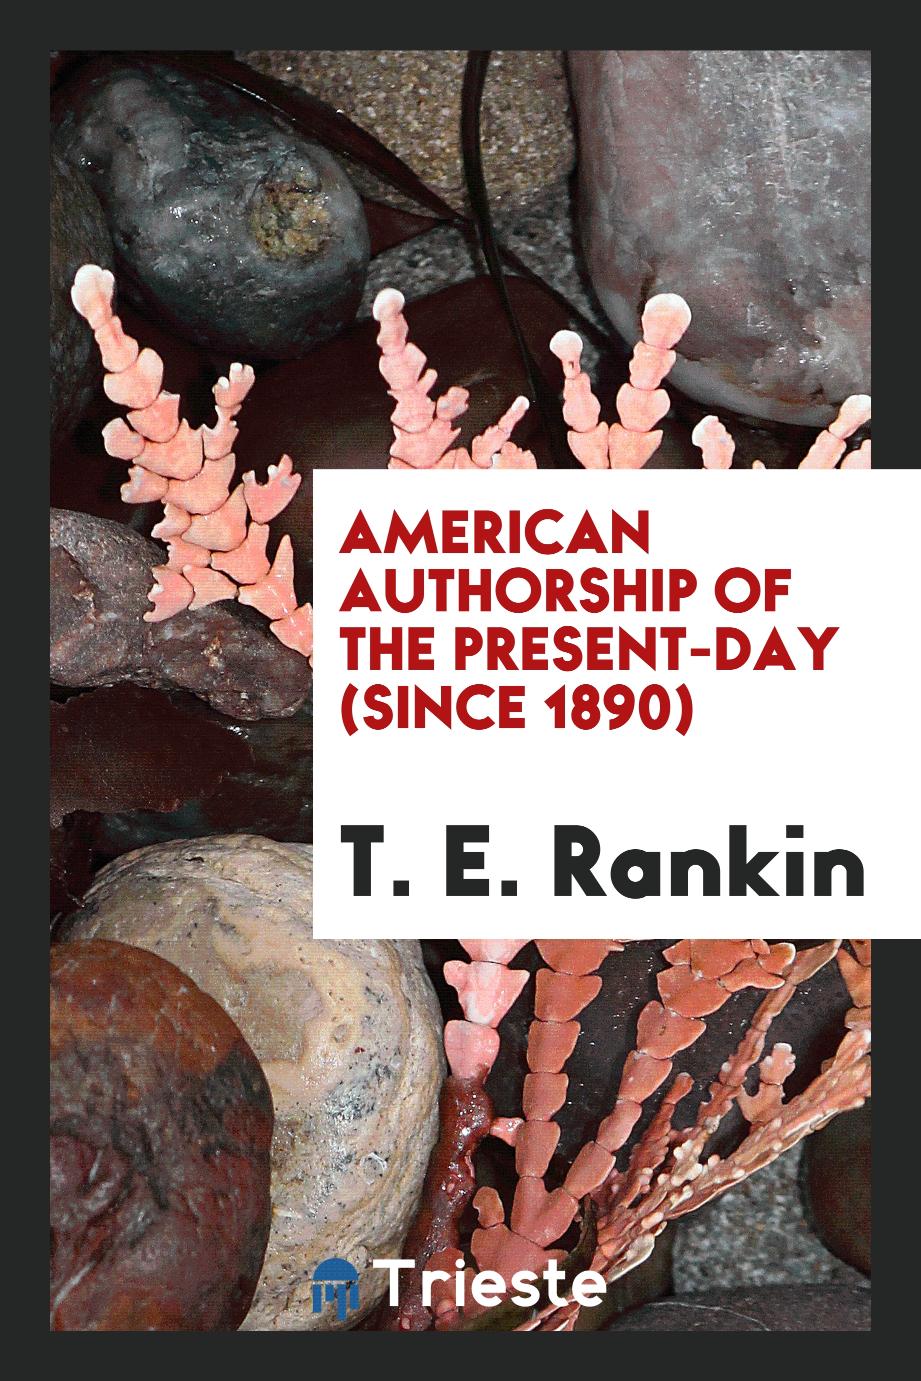 American Authorship of the Present-Day (Since 1890)